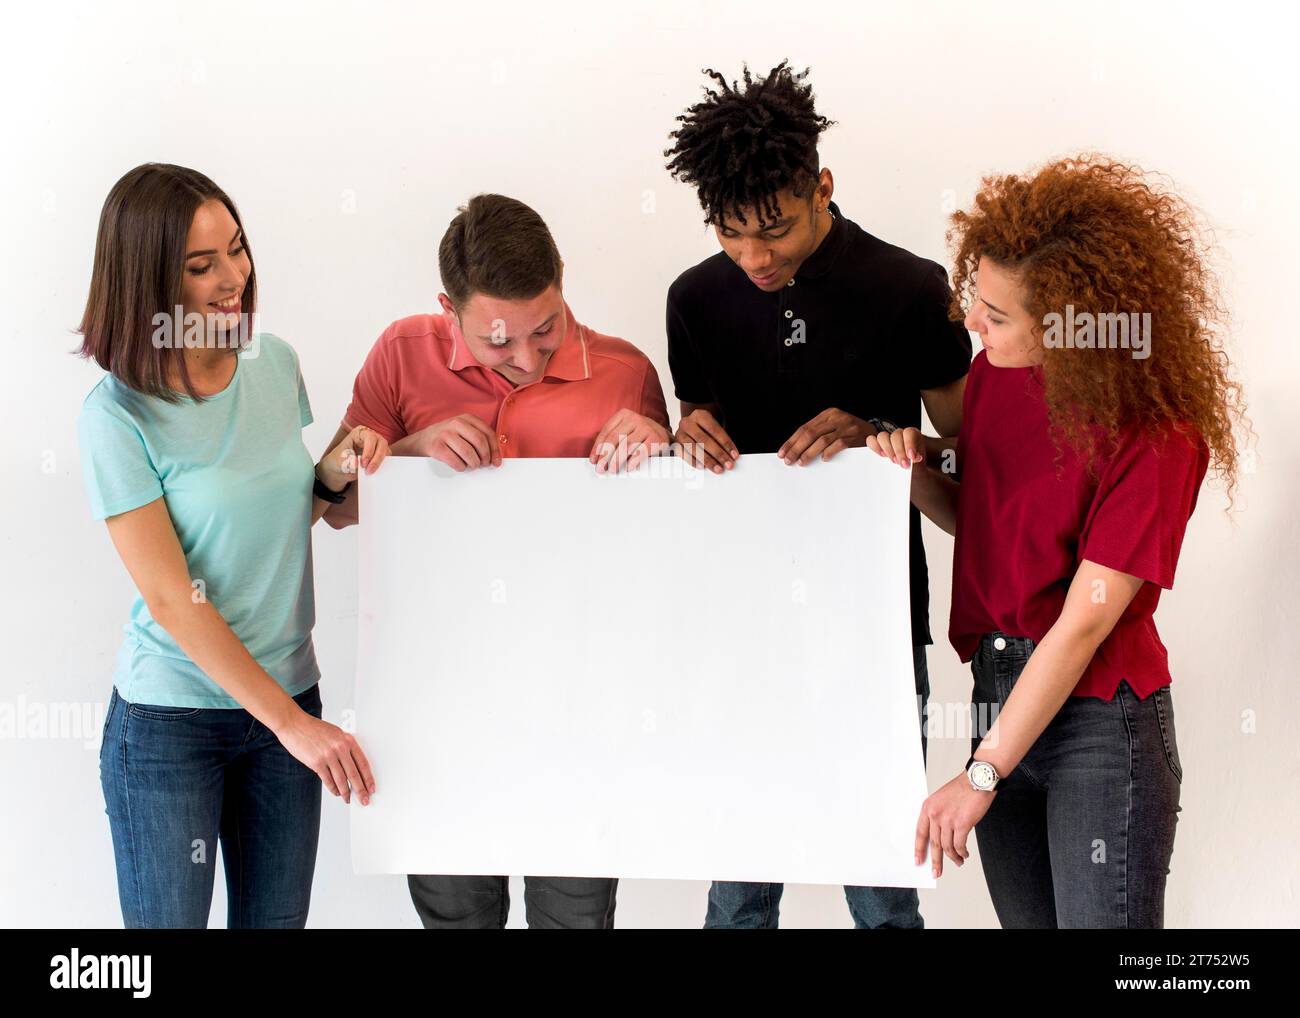 Group smiling multiethnic friends holding blank white placard standing white background Stock Photo